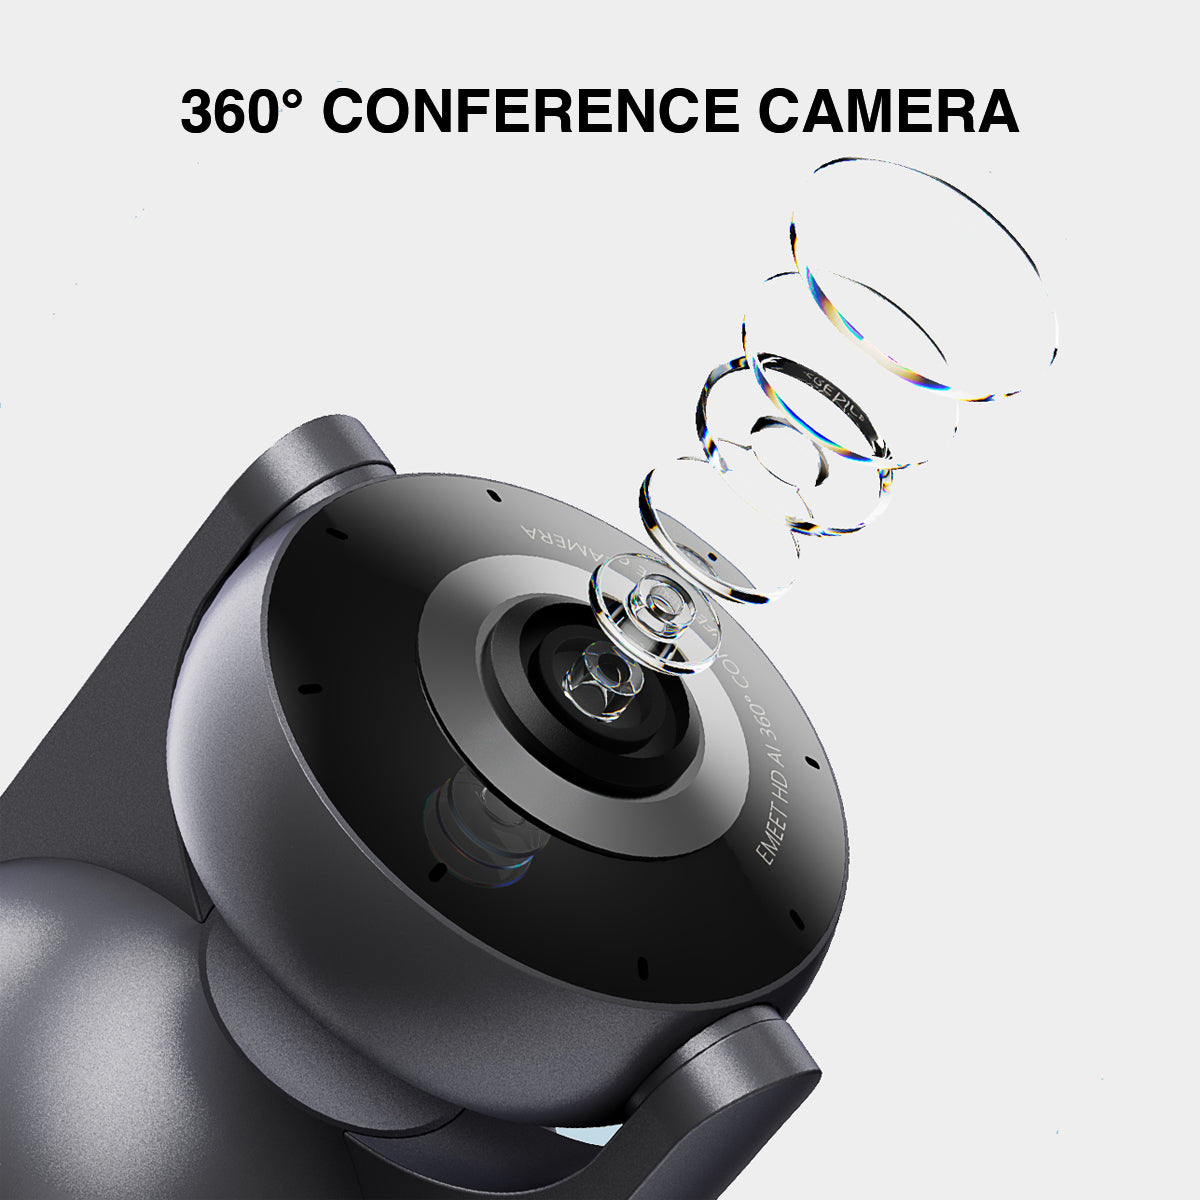 360° Conference Camera - Meeting Capsule